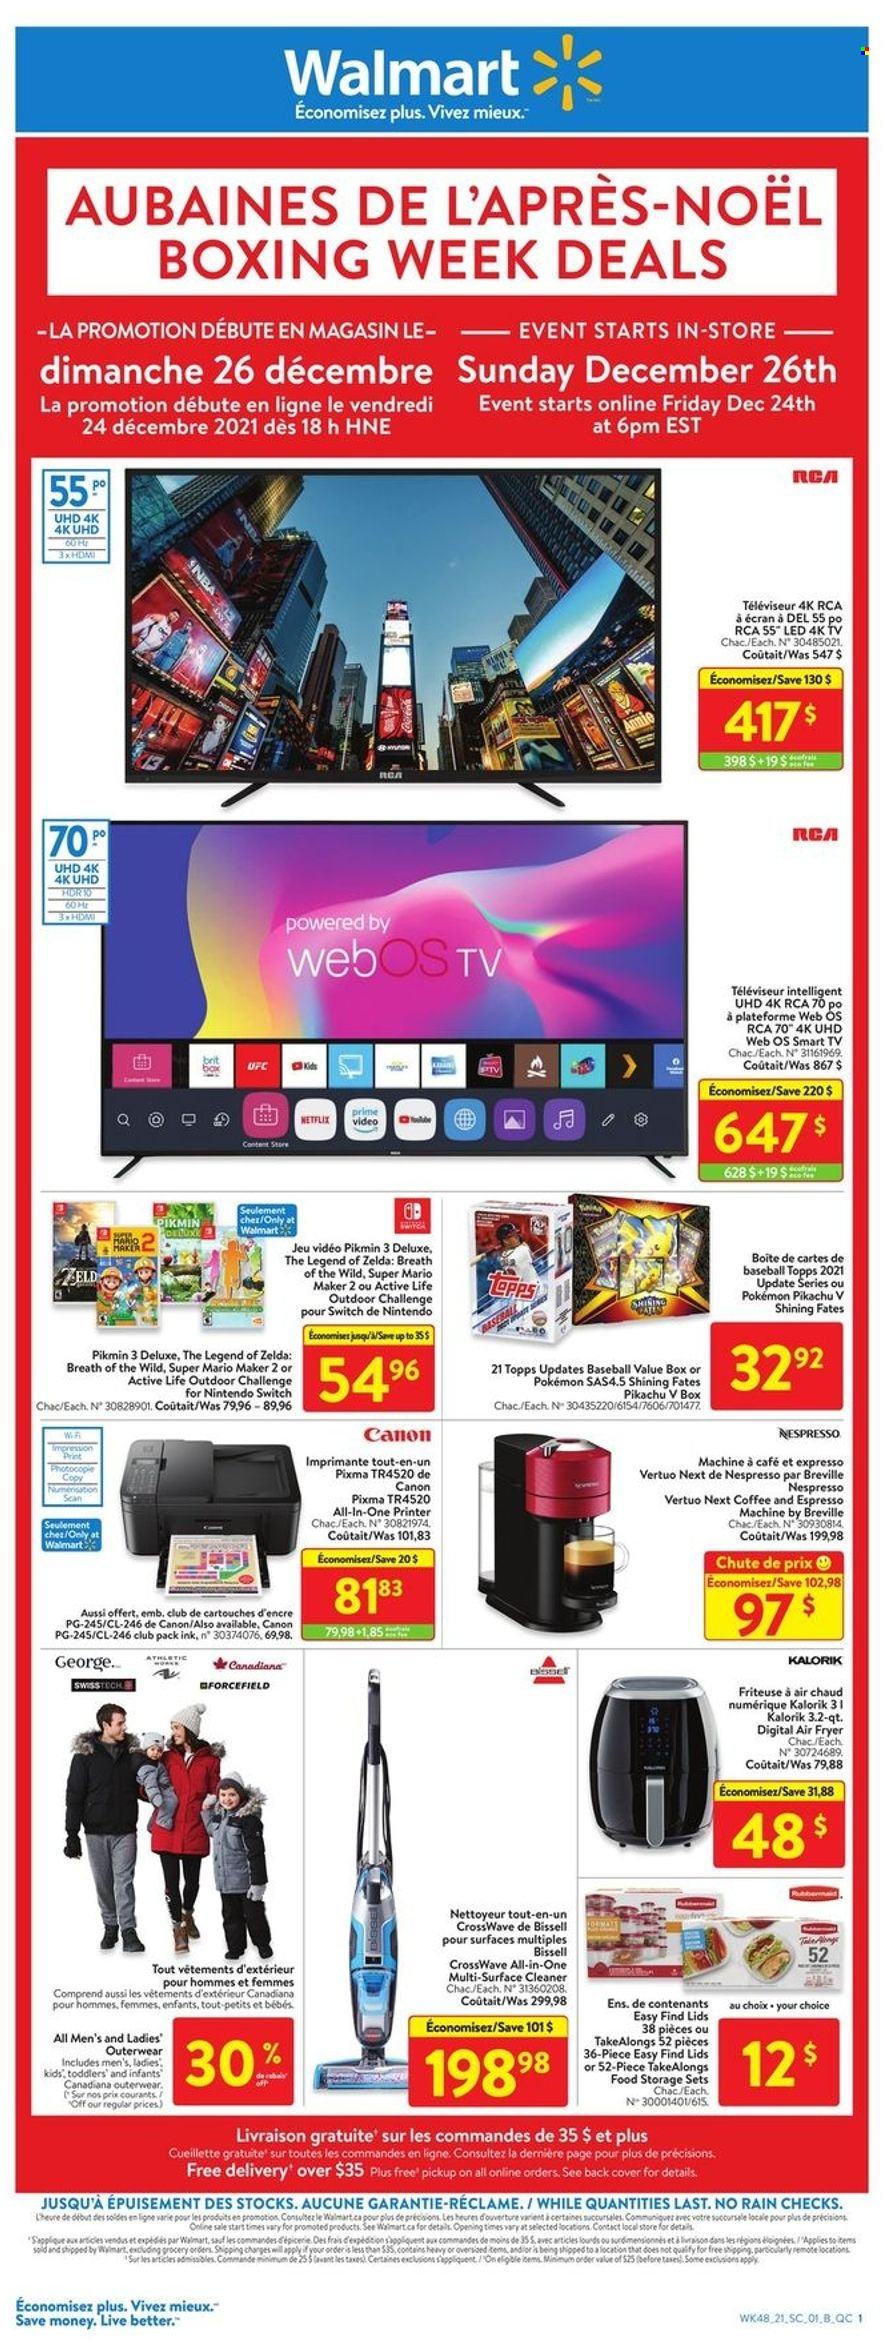 Walmart Flyer - December 26, 2021 - December 29, 2021 - Sales products - Nintendo Switch, webos, coffee, Nespresso, surface cleaner, cleaner, Pokémon, RCA, Pikachu, TV, coffee machine, espresso maker, Bissell, air fryer, all-in-one printer, printer, Canon, smart tv. Page 1.